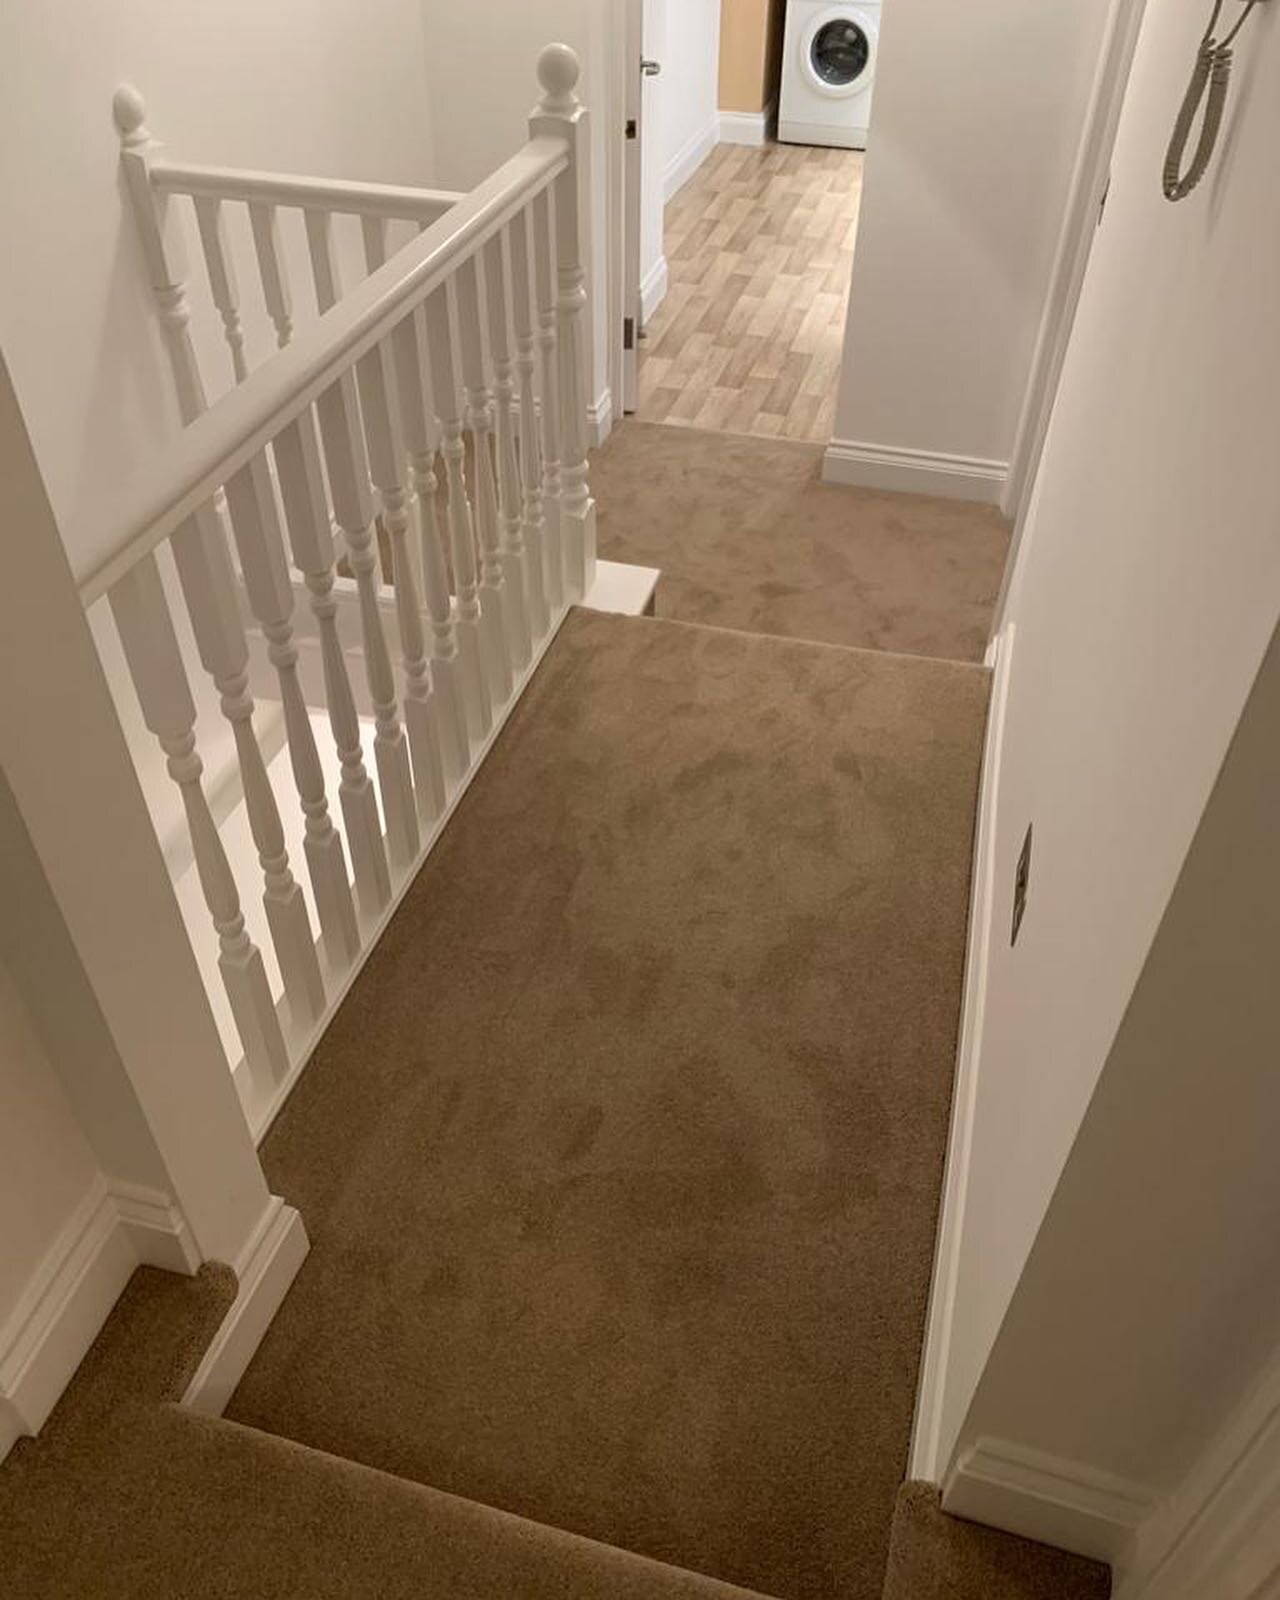 Landlords and Lettings Agents, can we help with your flooring needs? Here is a prime example of our rental work, competitively priced and immaculately installed. 

Get in touch for a chat about our free measuring service and no obligation quote 

#ld